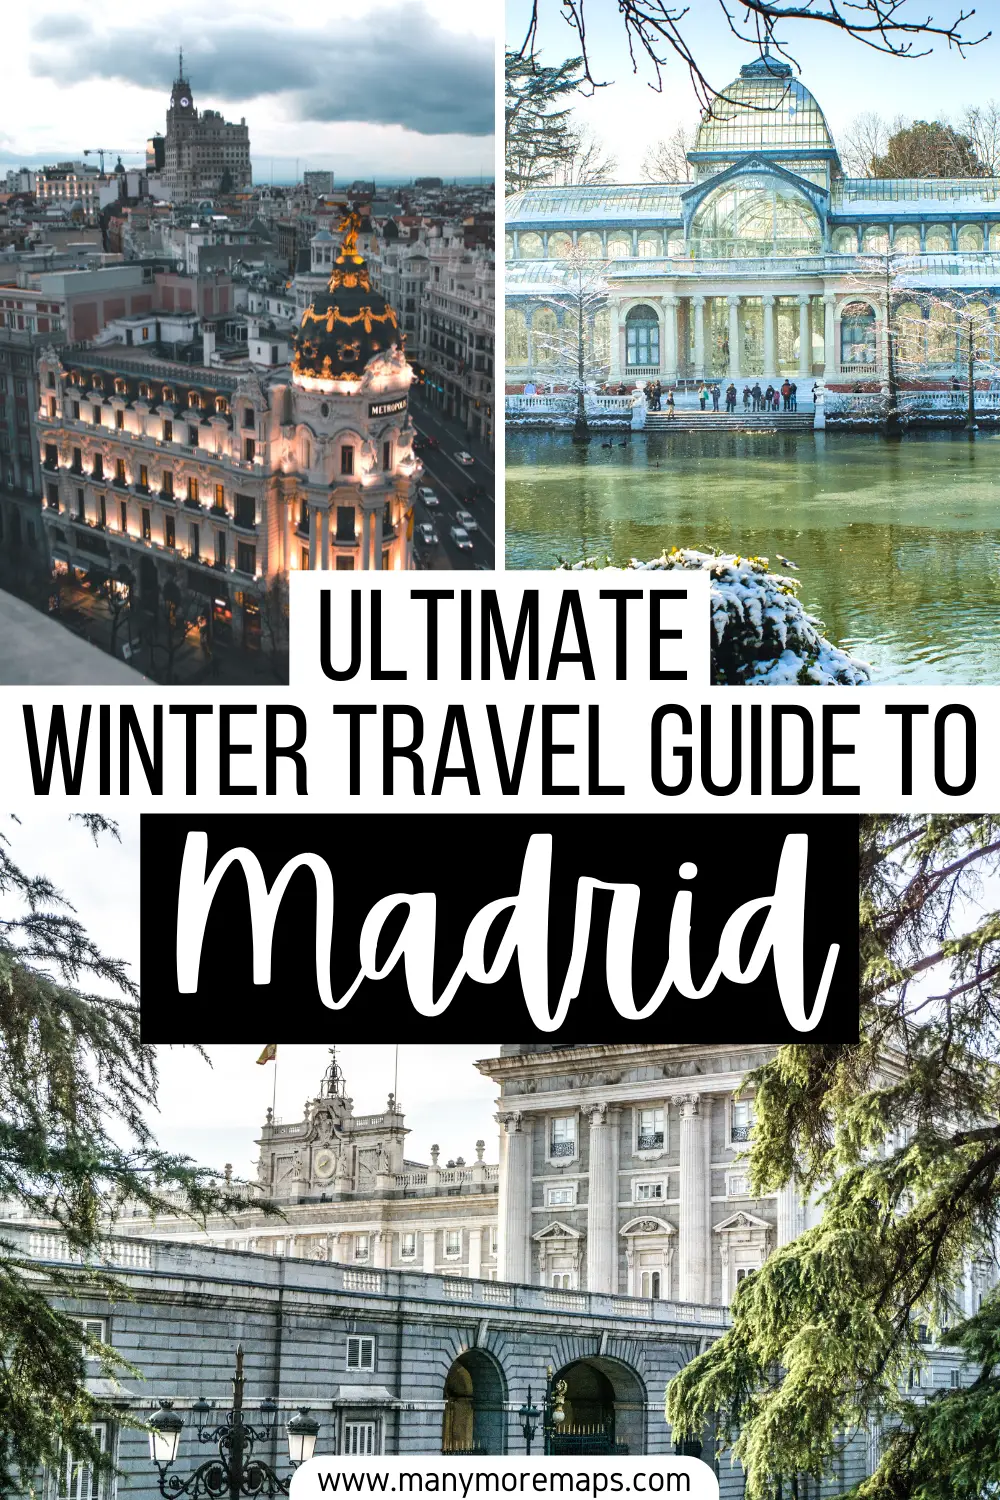 Planning a winter trip to Madrid, Spain? In this travel guide you'll find everything you need to know before you visit, including the best things to do and places to visit in Madrid in winter, what to pack and the best hotels.